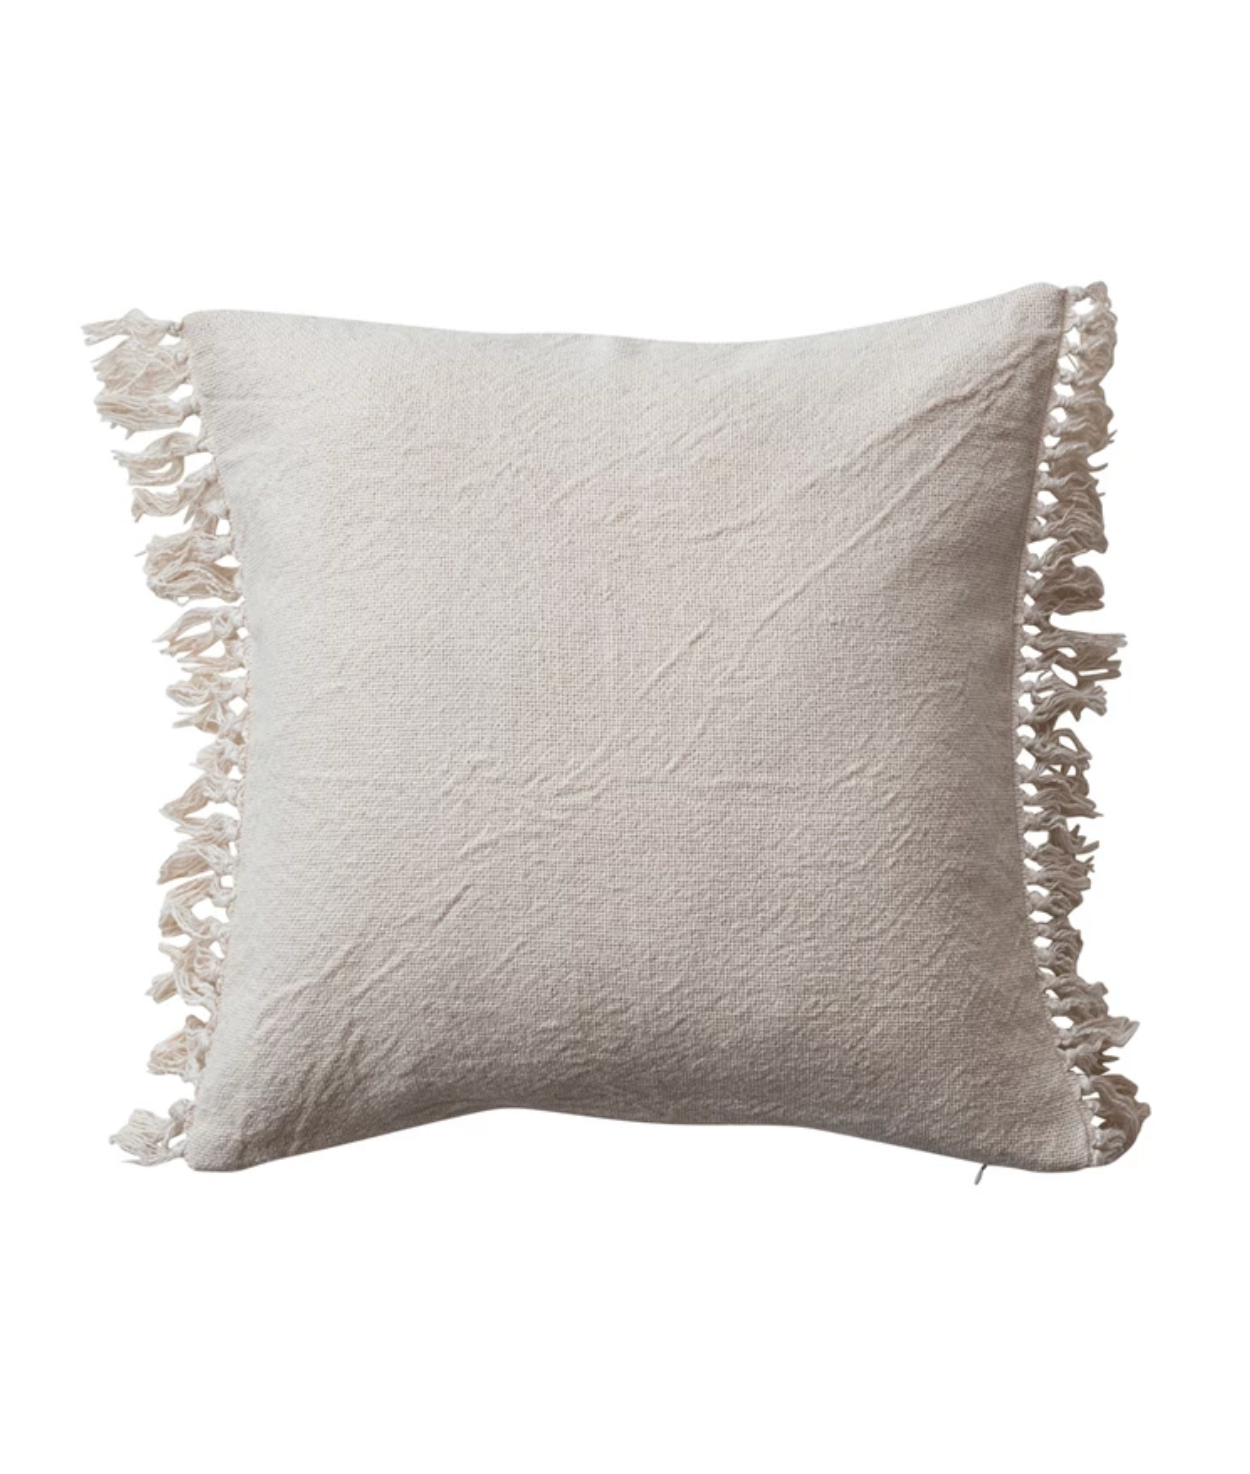 Cotton Pillow with Fringe